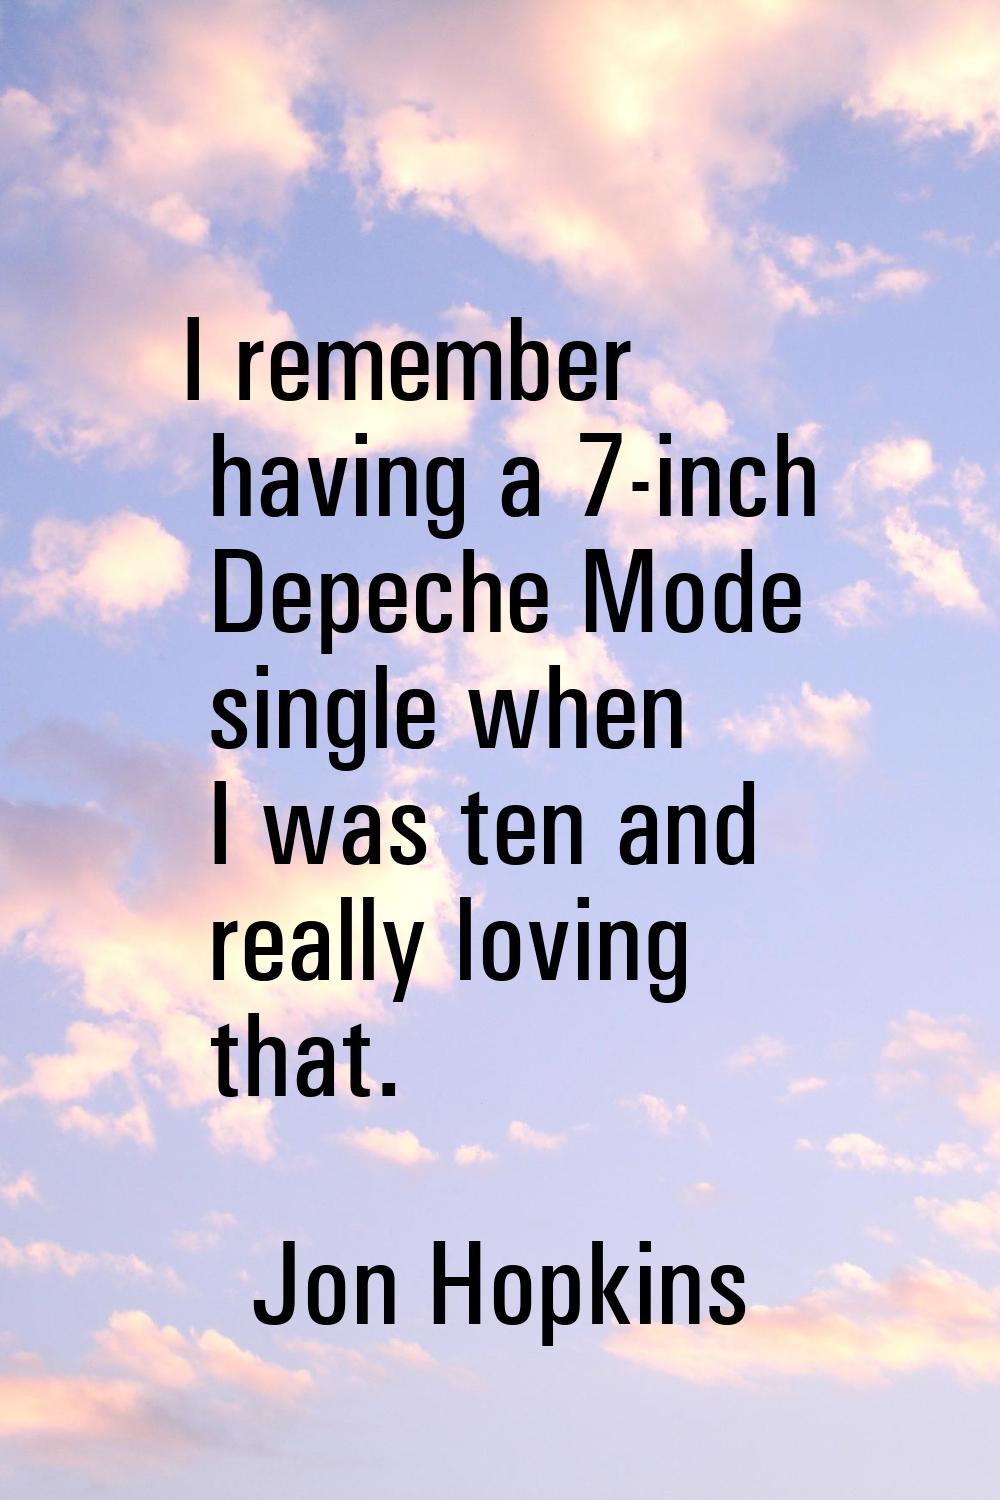 I remember having a 7-inch Depeche Mode single when I was ten and really loving that.